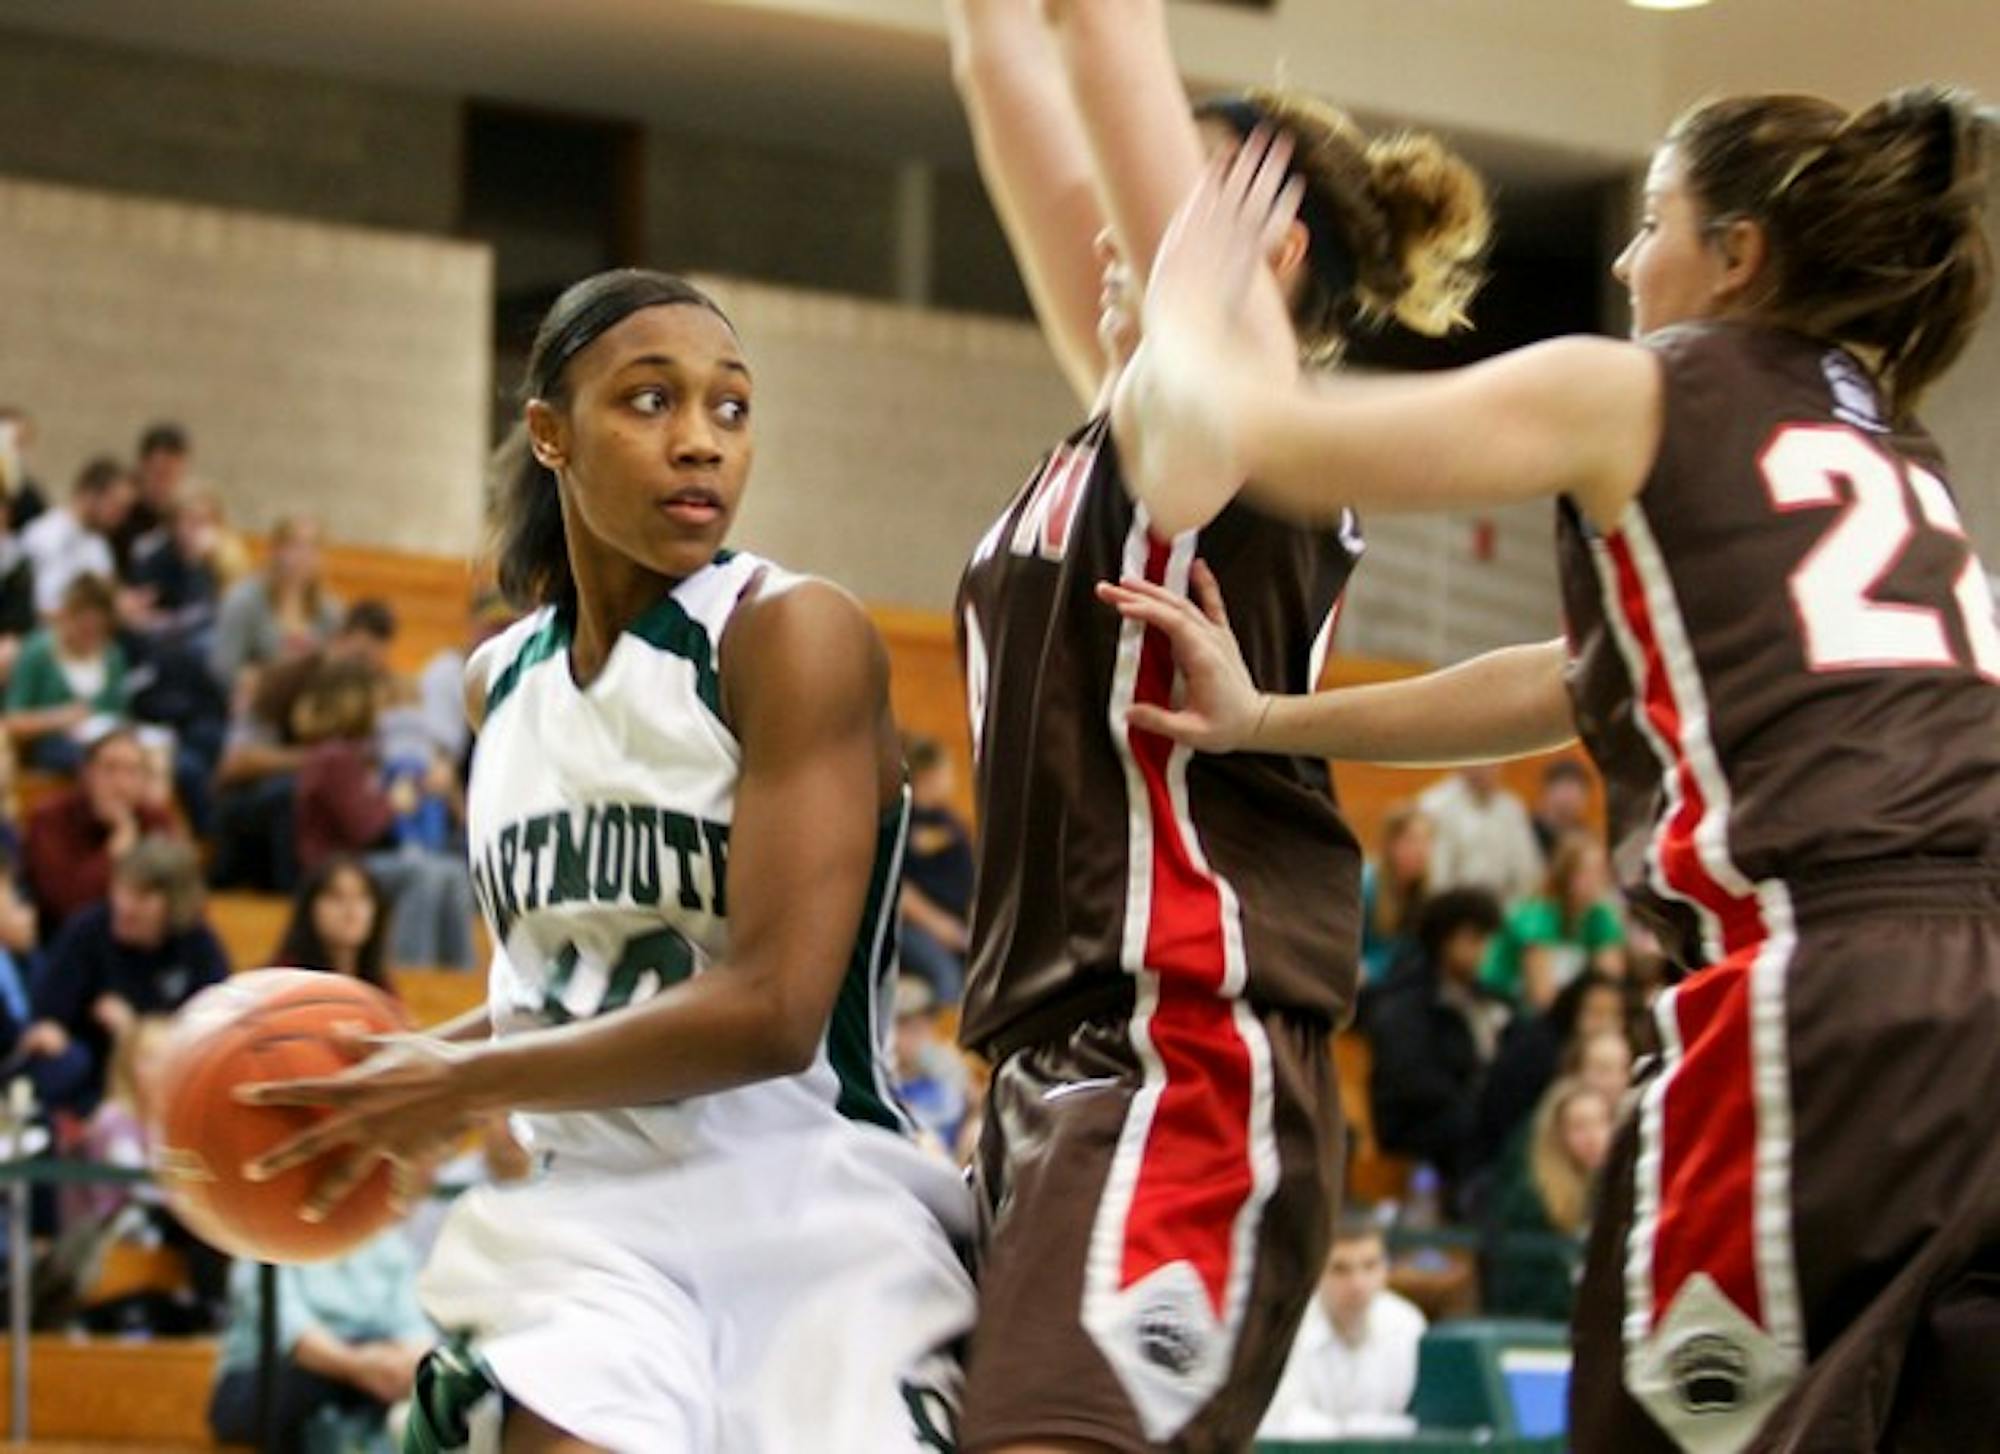 Brittney Smith '11 was last season's Ivy League Rookie of the Year and was second on the team in scoring.